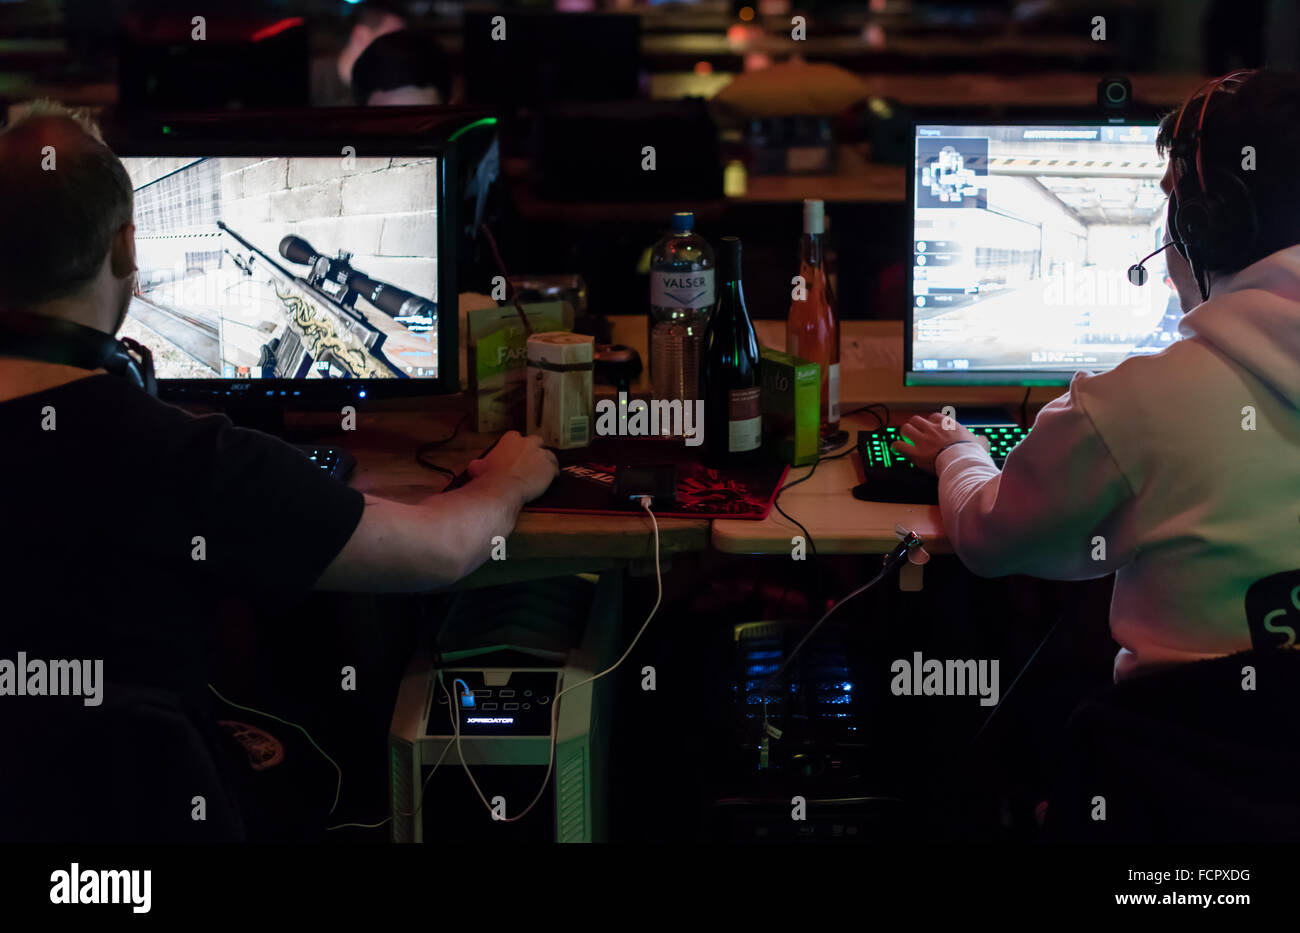 Computer game players are playing the first person shooter 'Counterstrike CS:GO' at a computer game tournament. Stock Photo